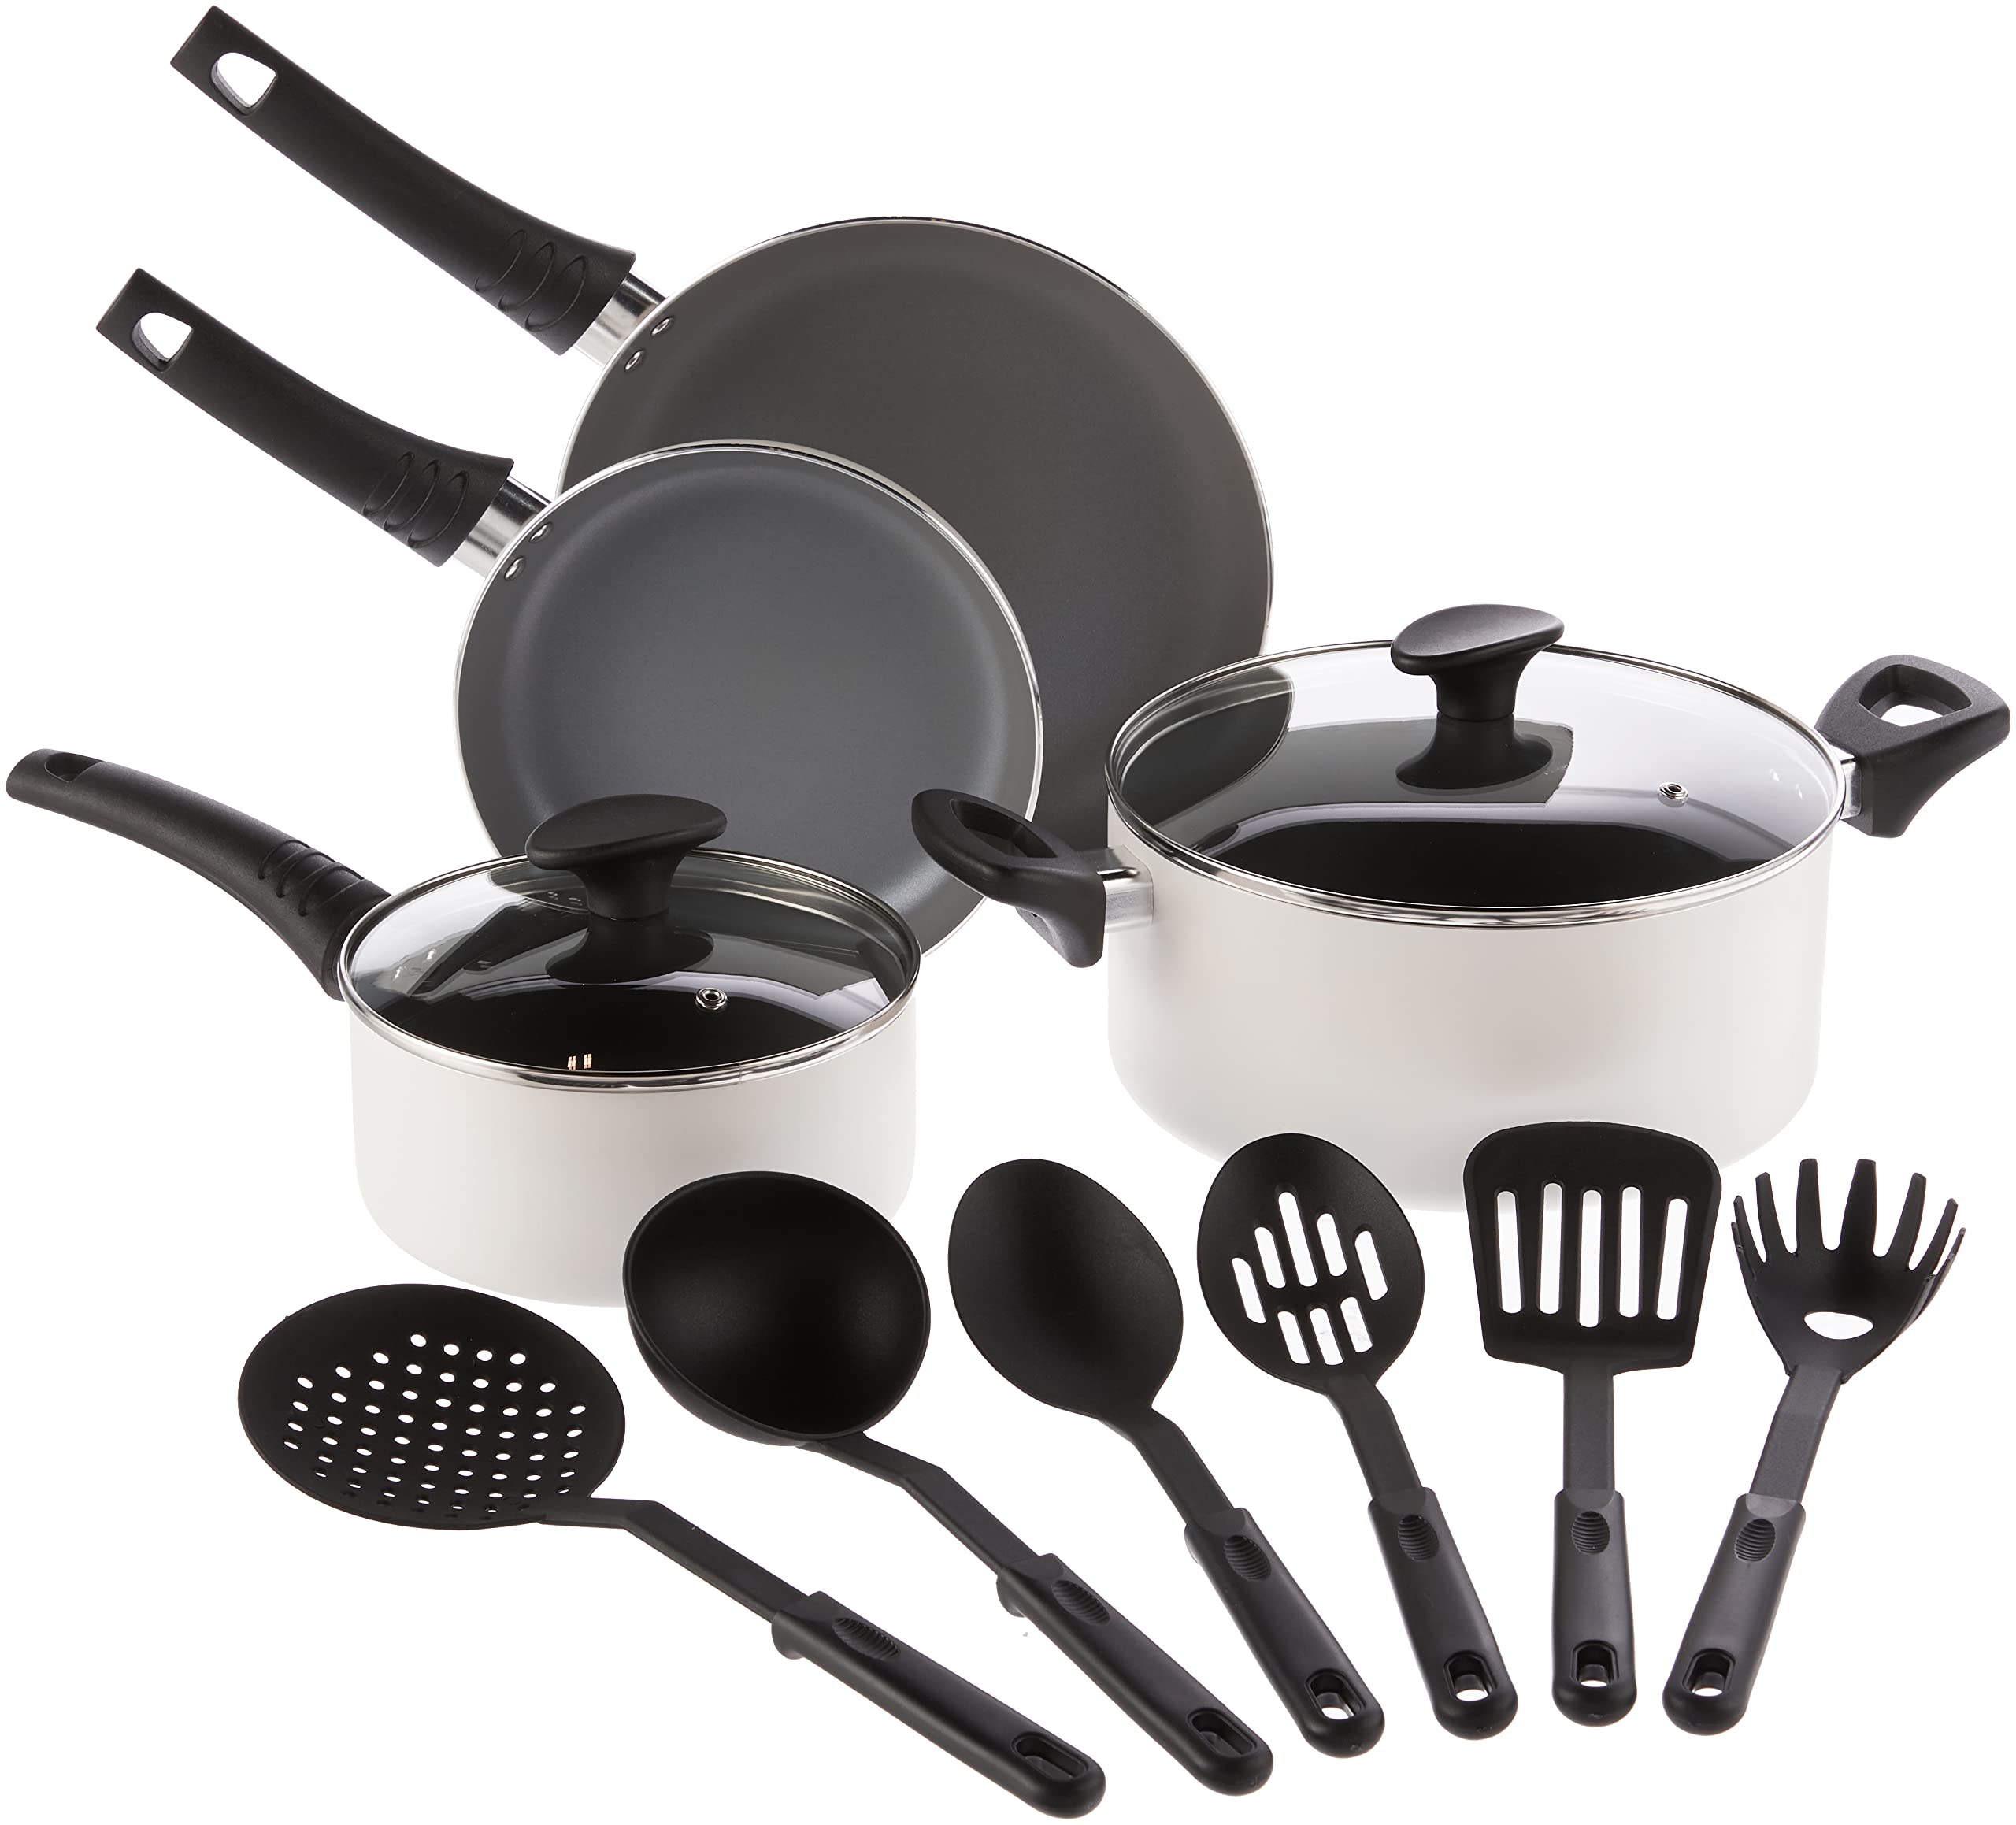 BELLA Cookware Set, 12 Piece Pots and Pans with Utensils, Nonstick Scratch Resistant Cooking Surface Compatible with All Stoves, Nylon and Aluminum, Cream